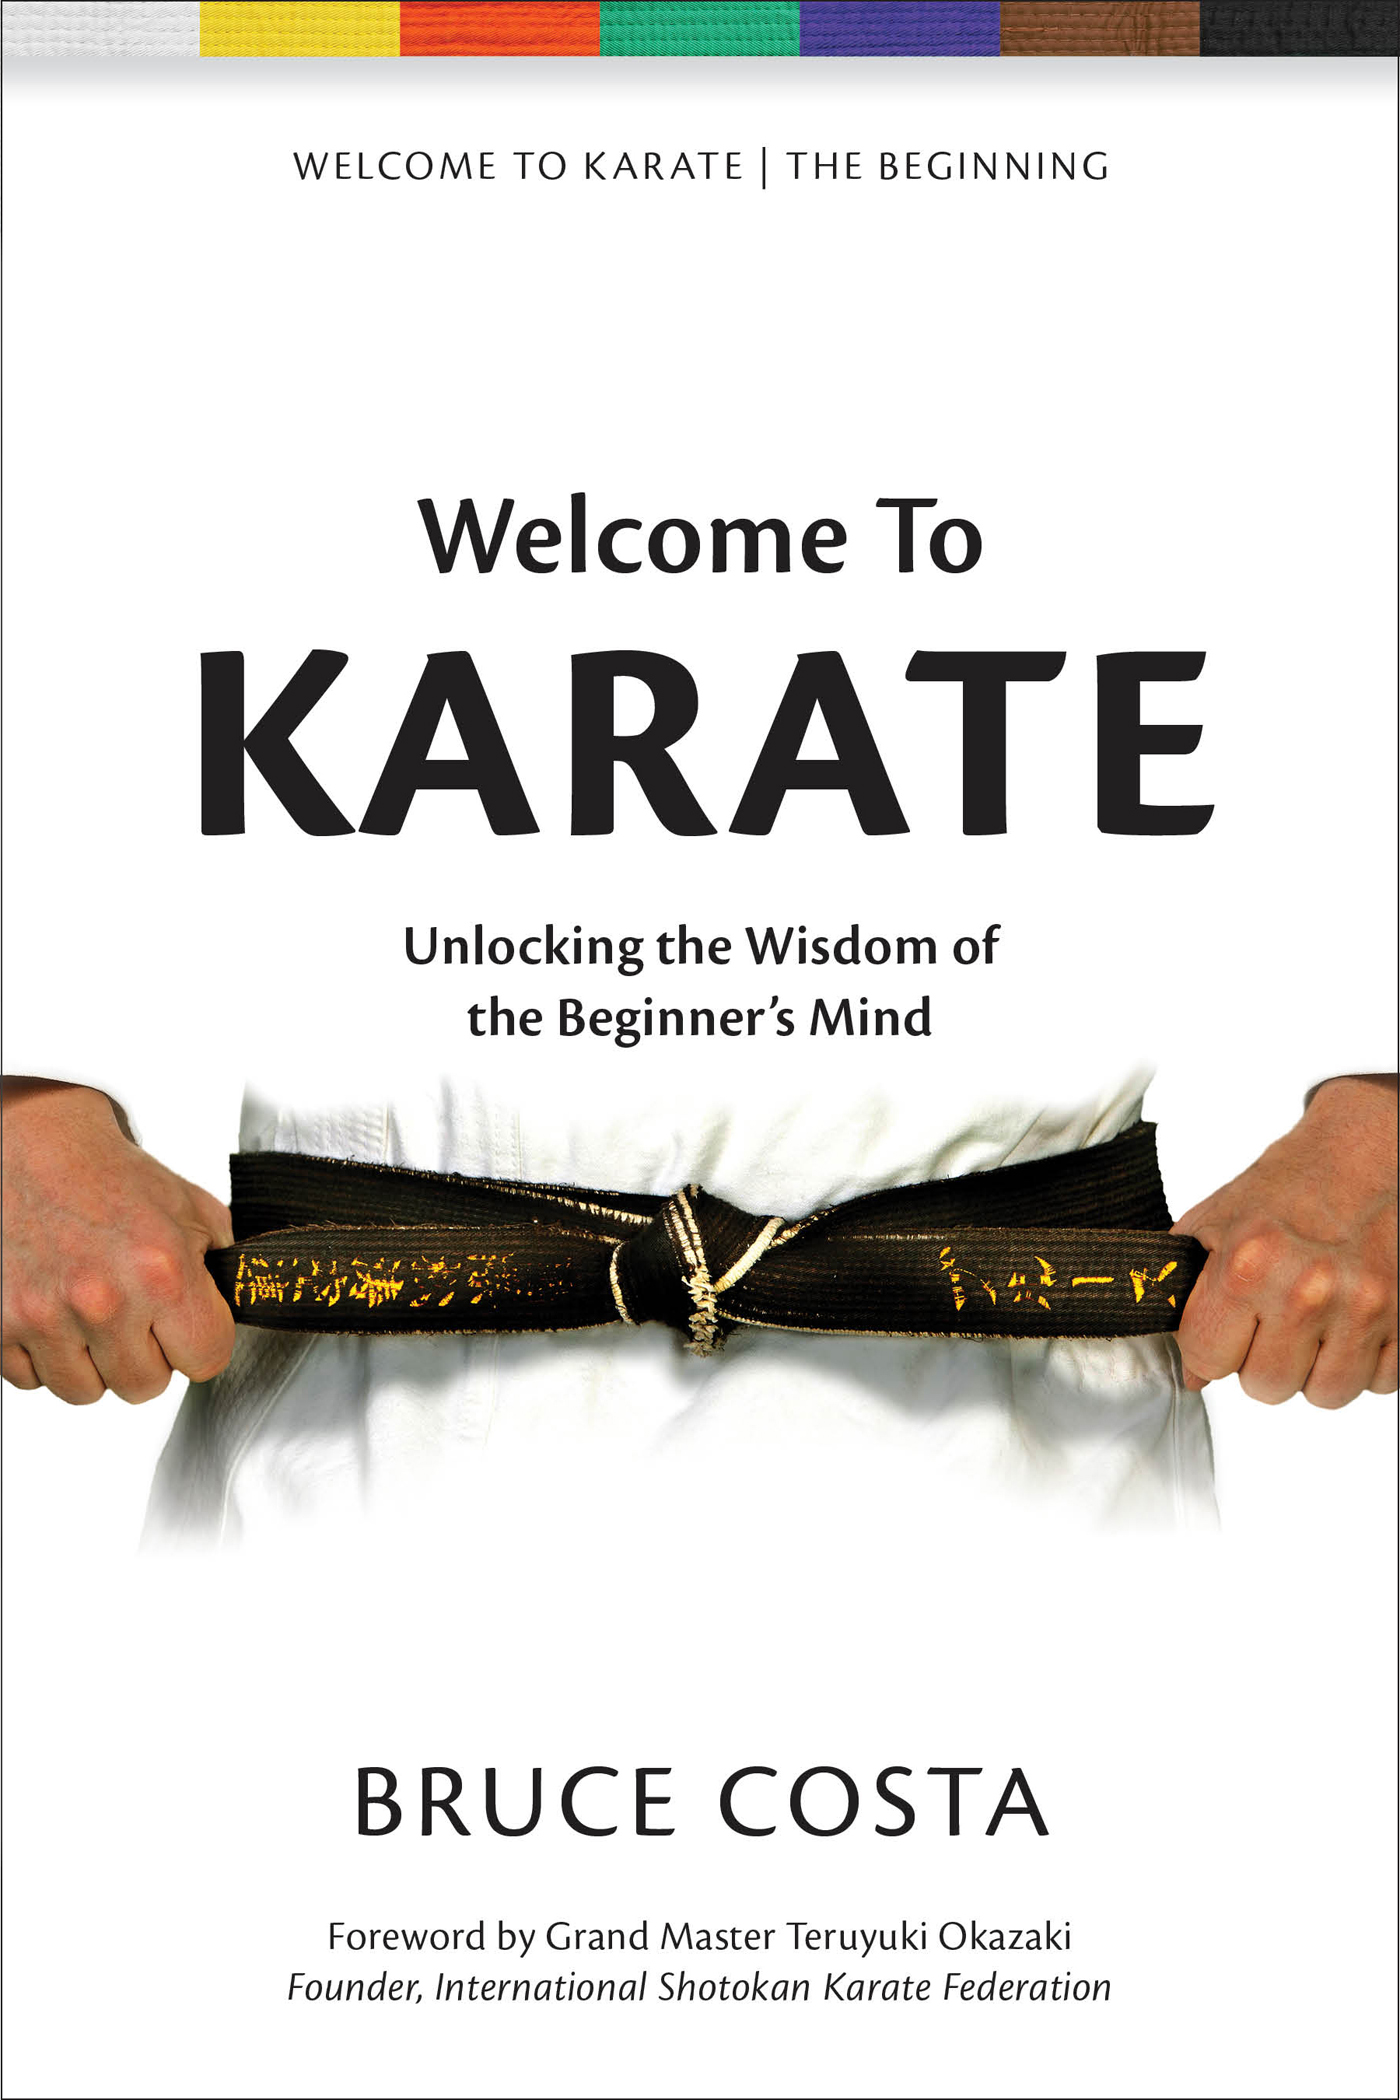 Welcome To KARATE Unlocking the Wisdom of the Beginners Mind BRUCE COSTA - photo 1